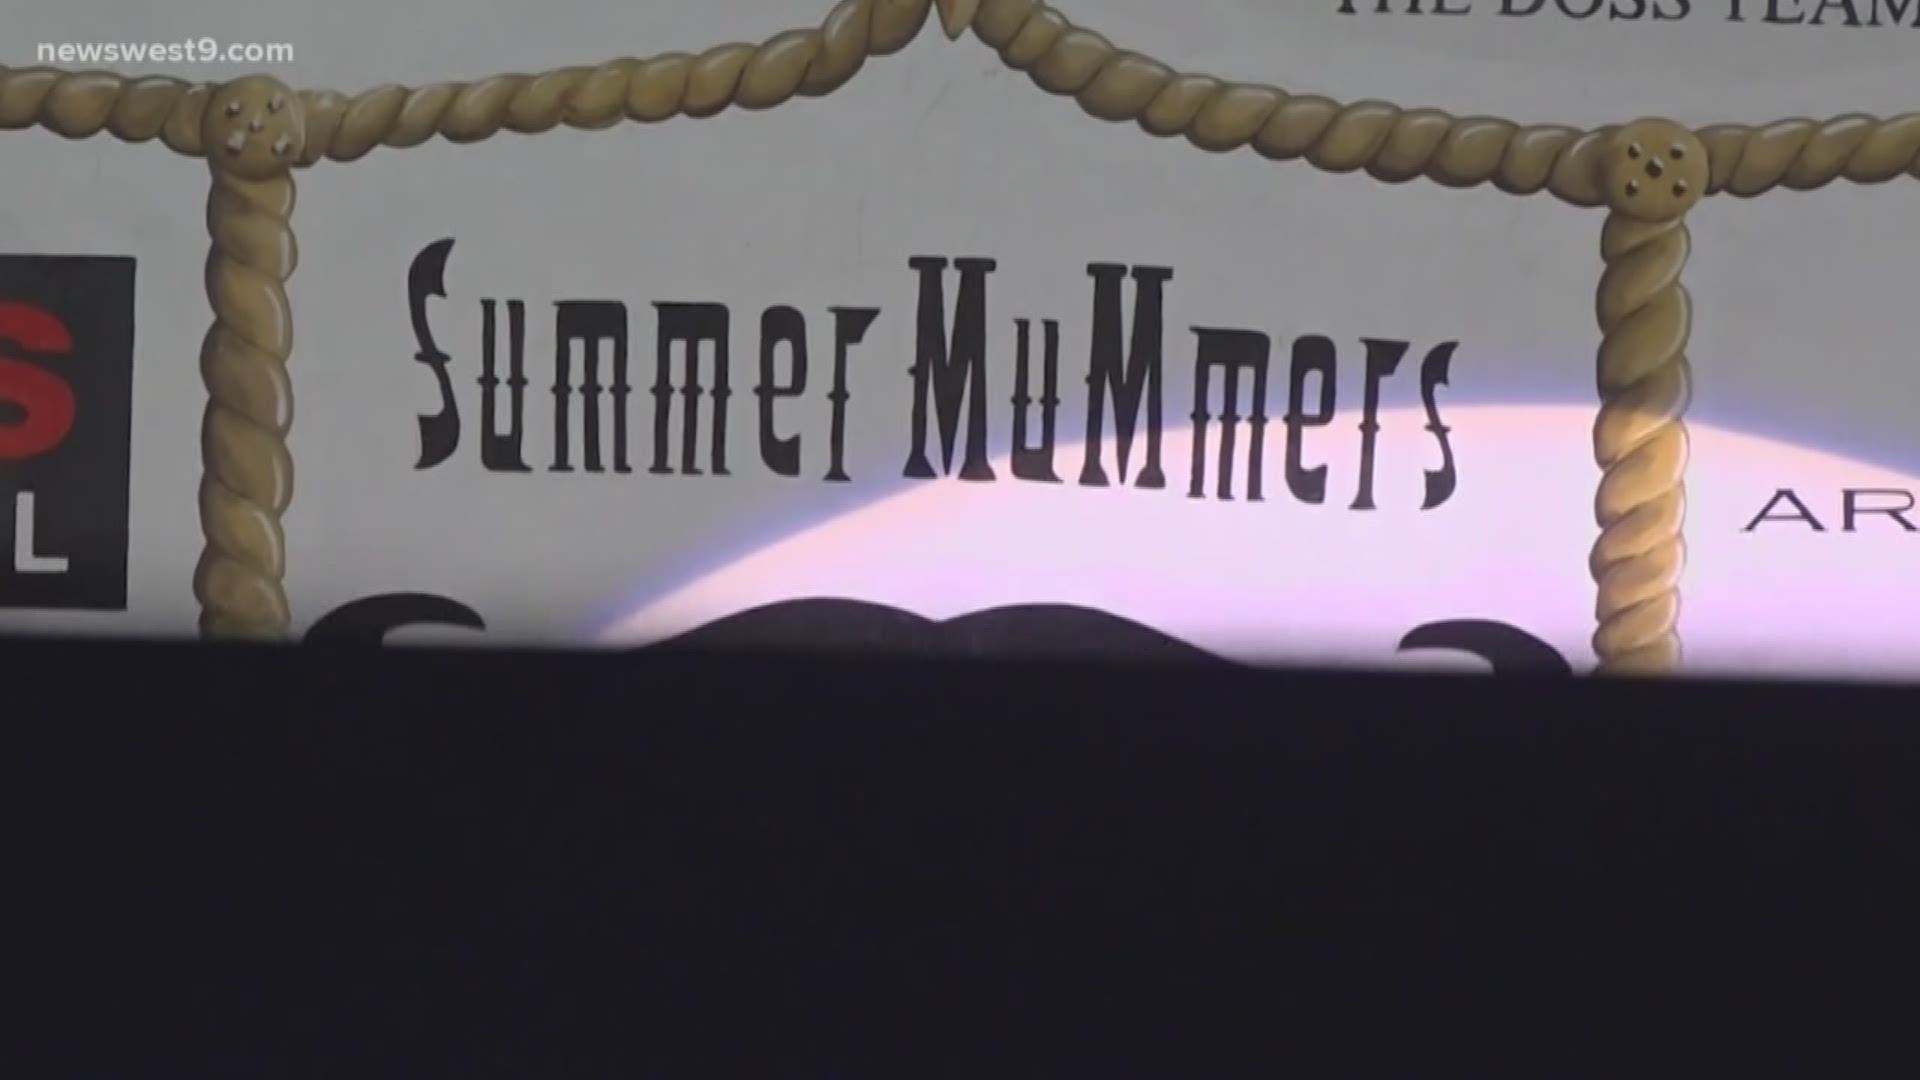 This year's version of Summer Mummers will be held virtually